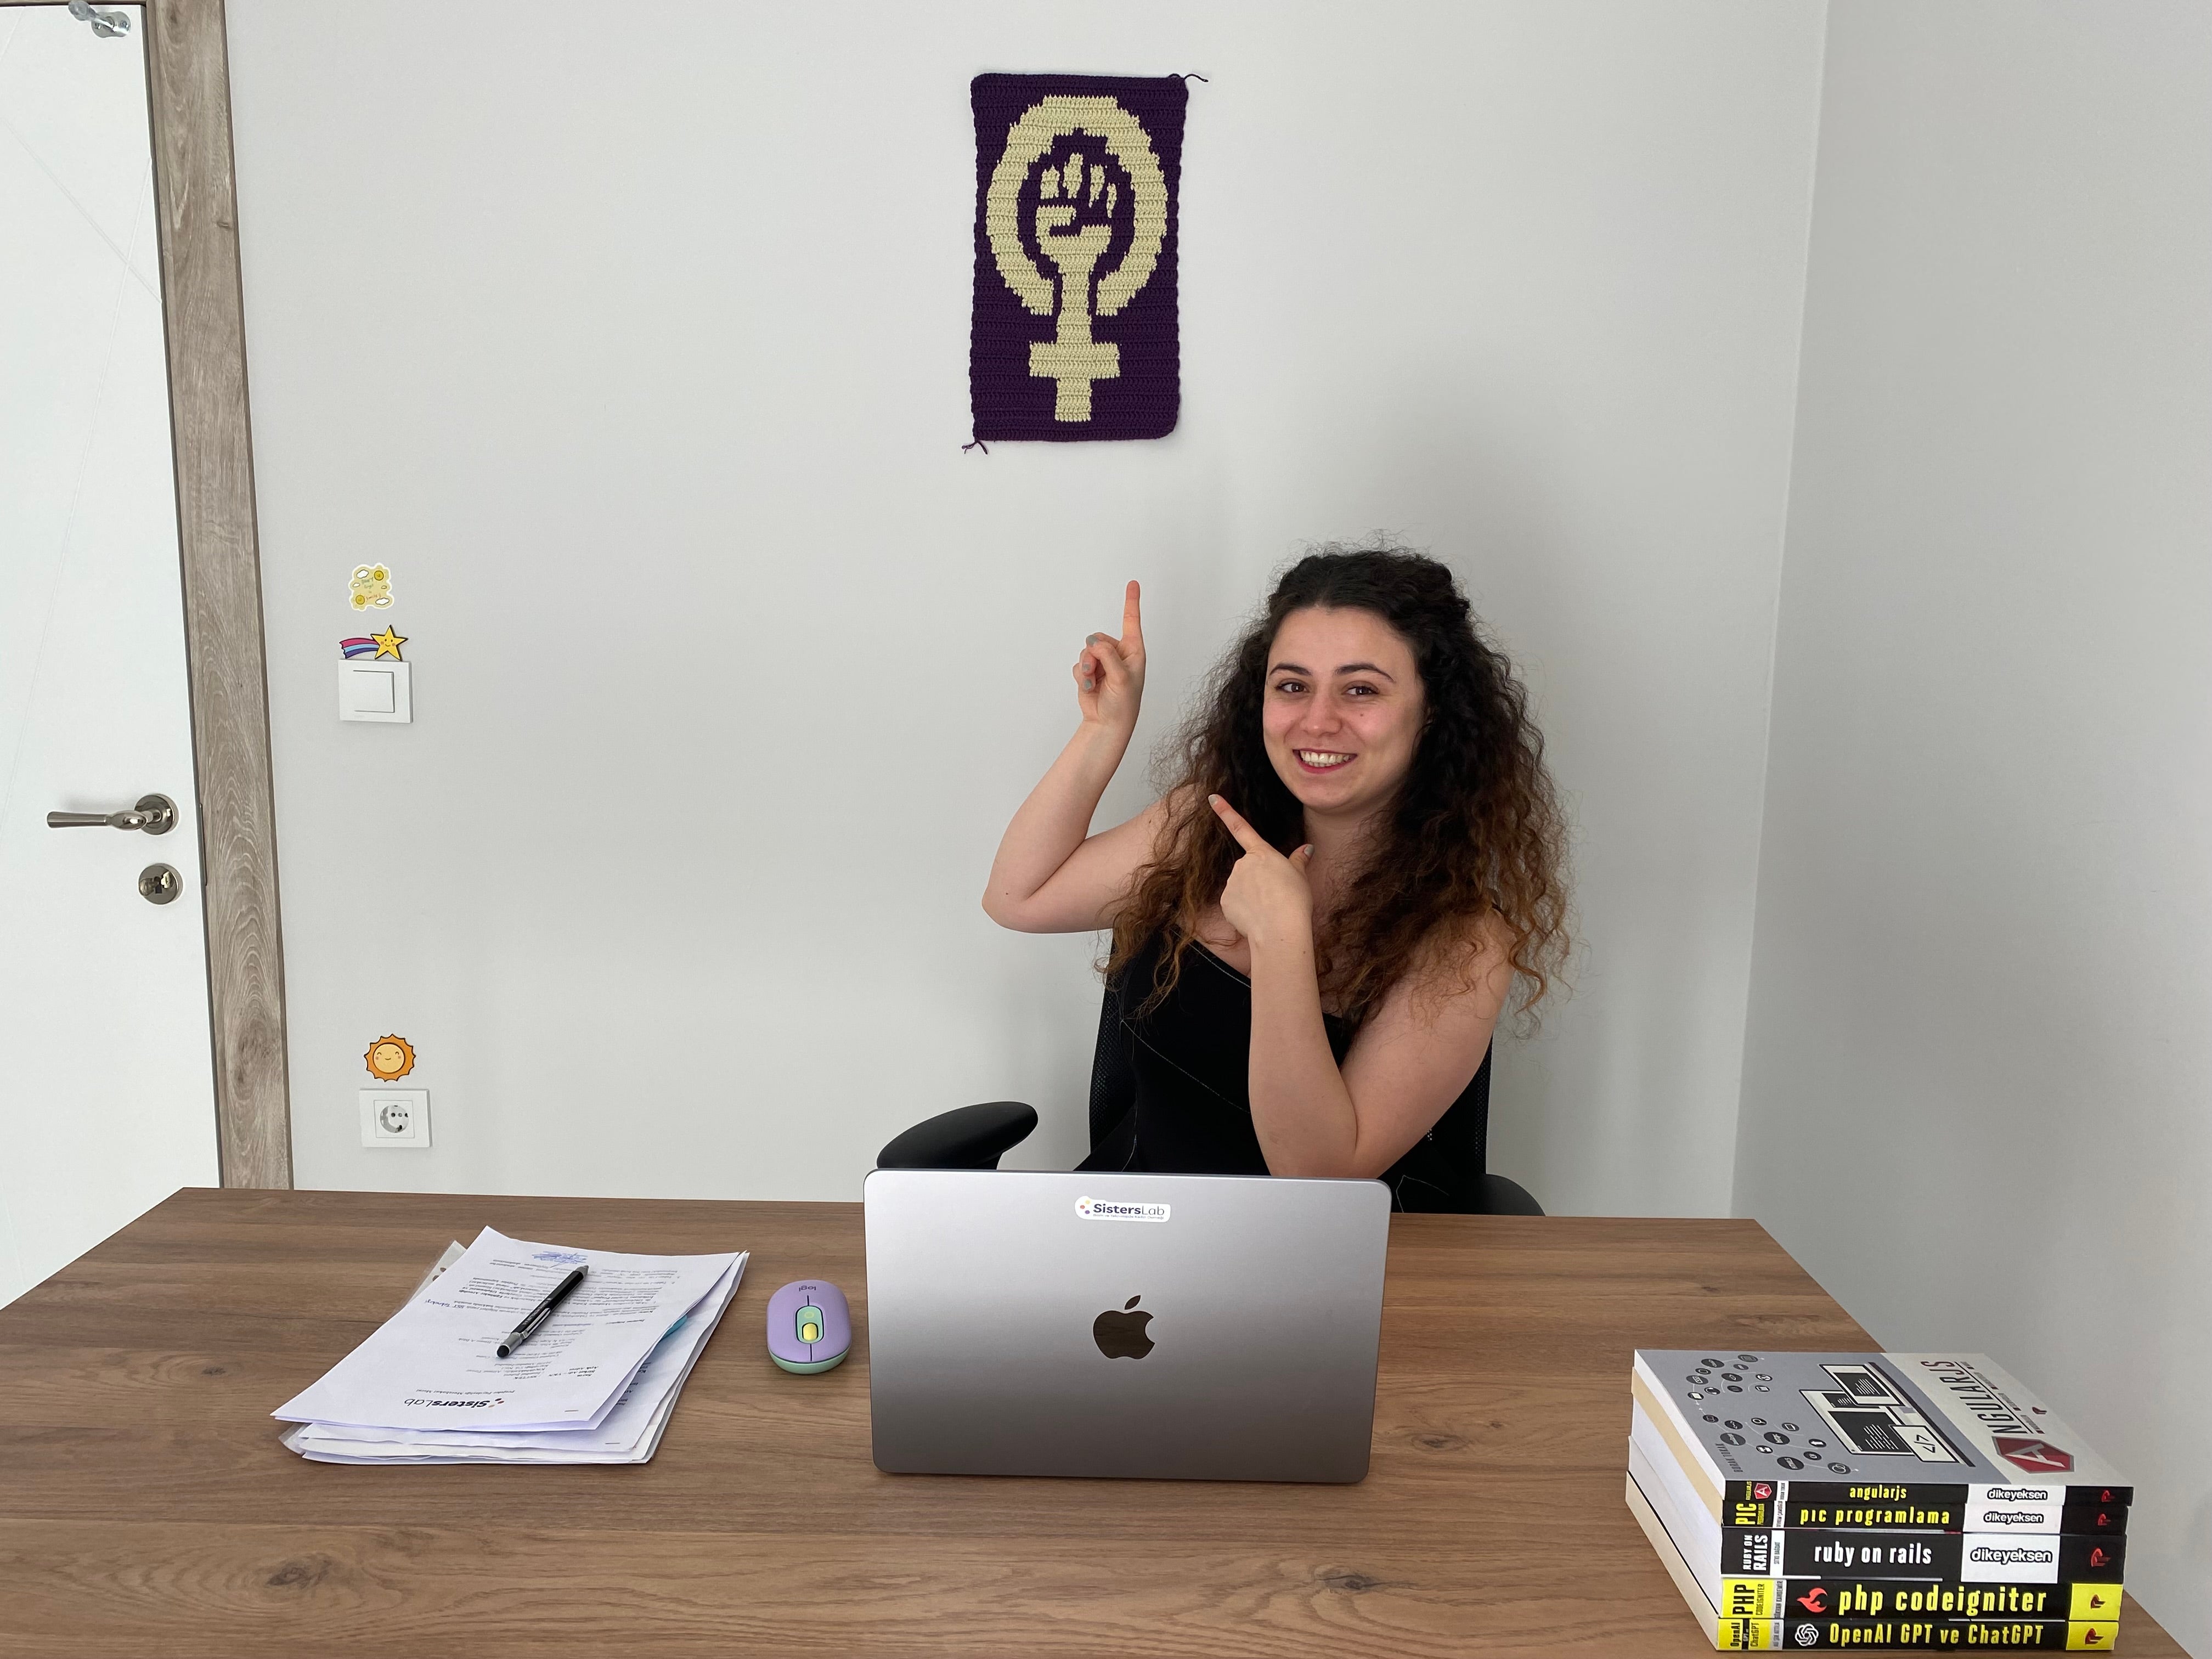 Nihal Güngör, co-founder of SistersLab - Association for Women in Science and Technology, Photo: Courtesy of Nihal Güngör